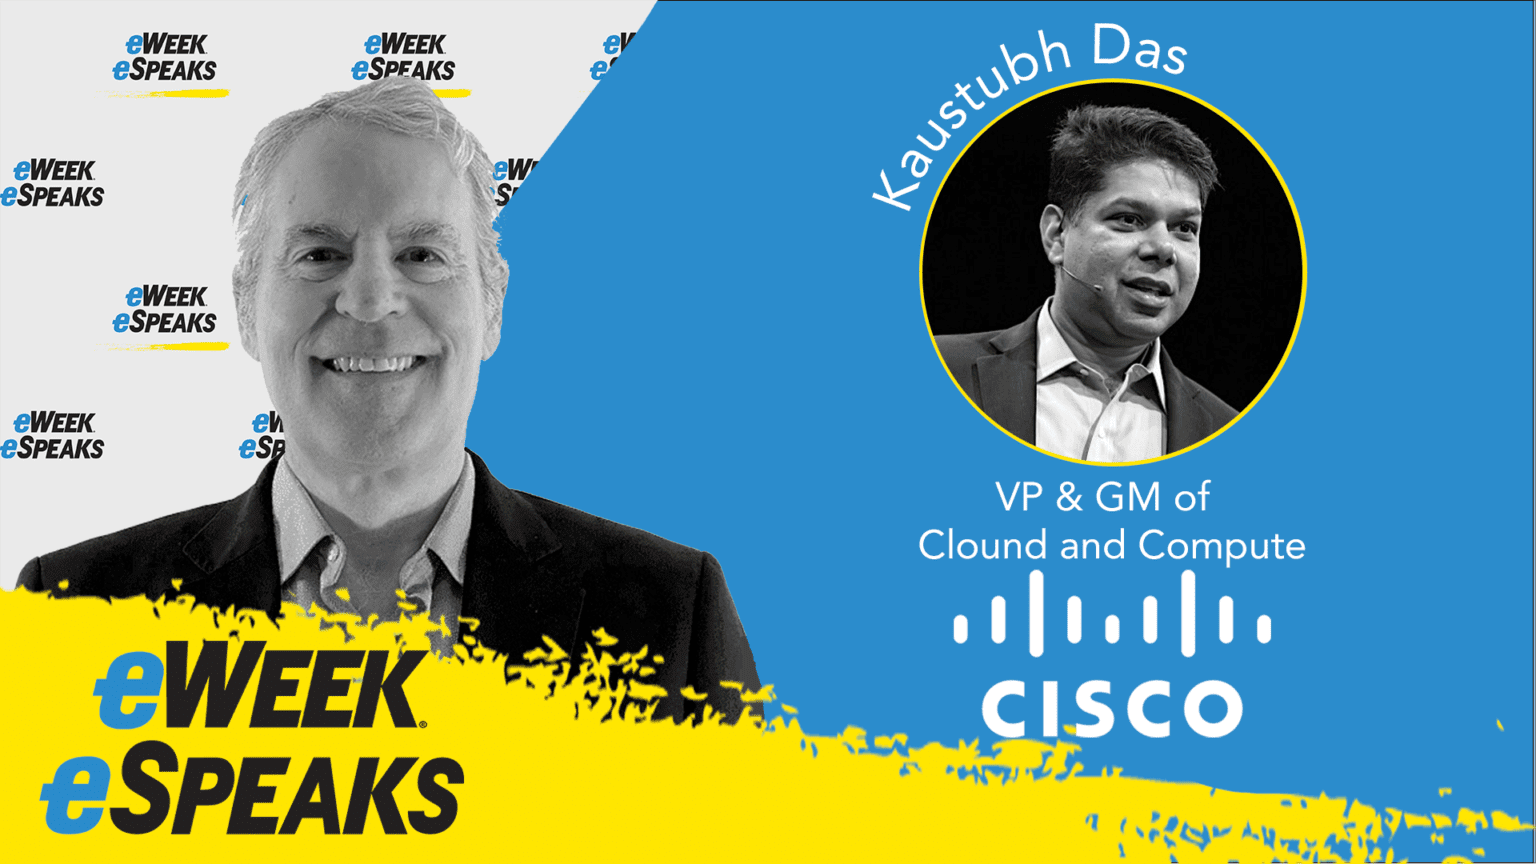 Cisco’s Kaustubh Das: The Importance of Commonality in the Cloud